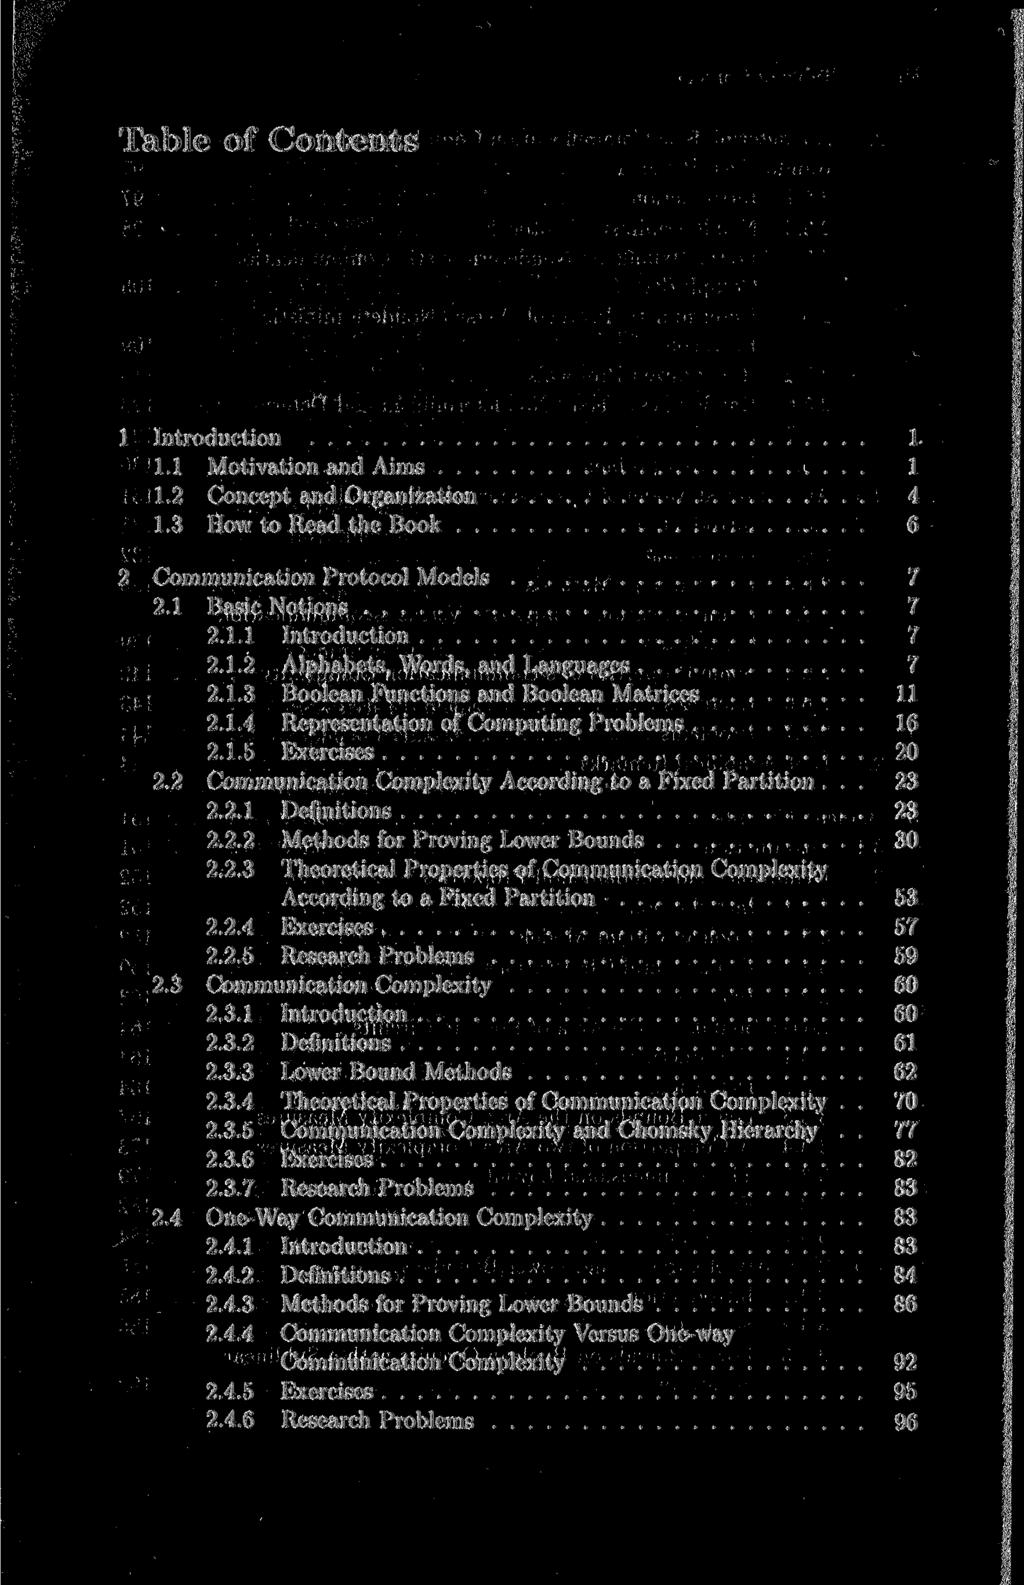 Table of Contents 1 Introduction 1 1.1 Motivation and Aims 1 1.2 Concept and Organization 4 1.3 How to Read the Book 6 2 Communication Protocol Models 7 2.1 Basic Notions 7 2.1.1 Introduction 7 2.1.2 Alphabets, Words, and Languages 7 2.